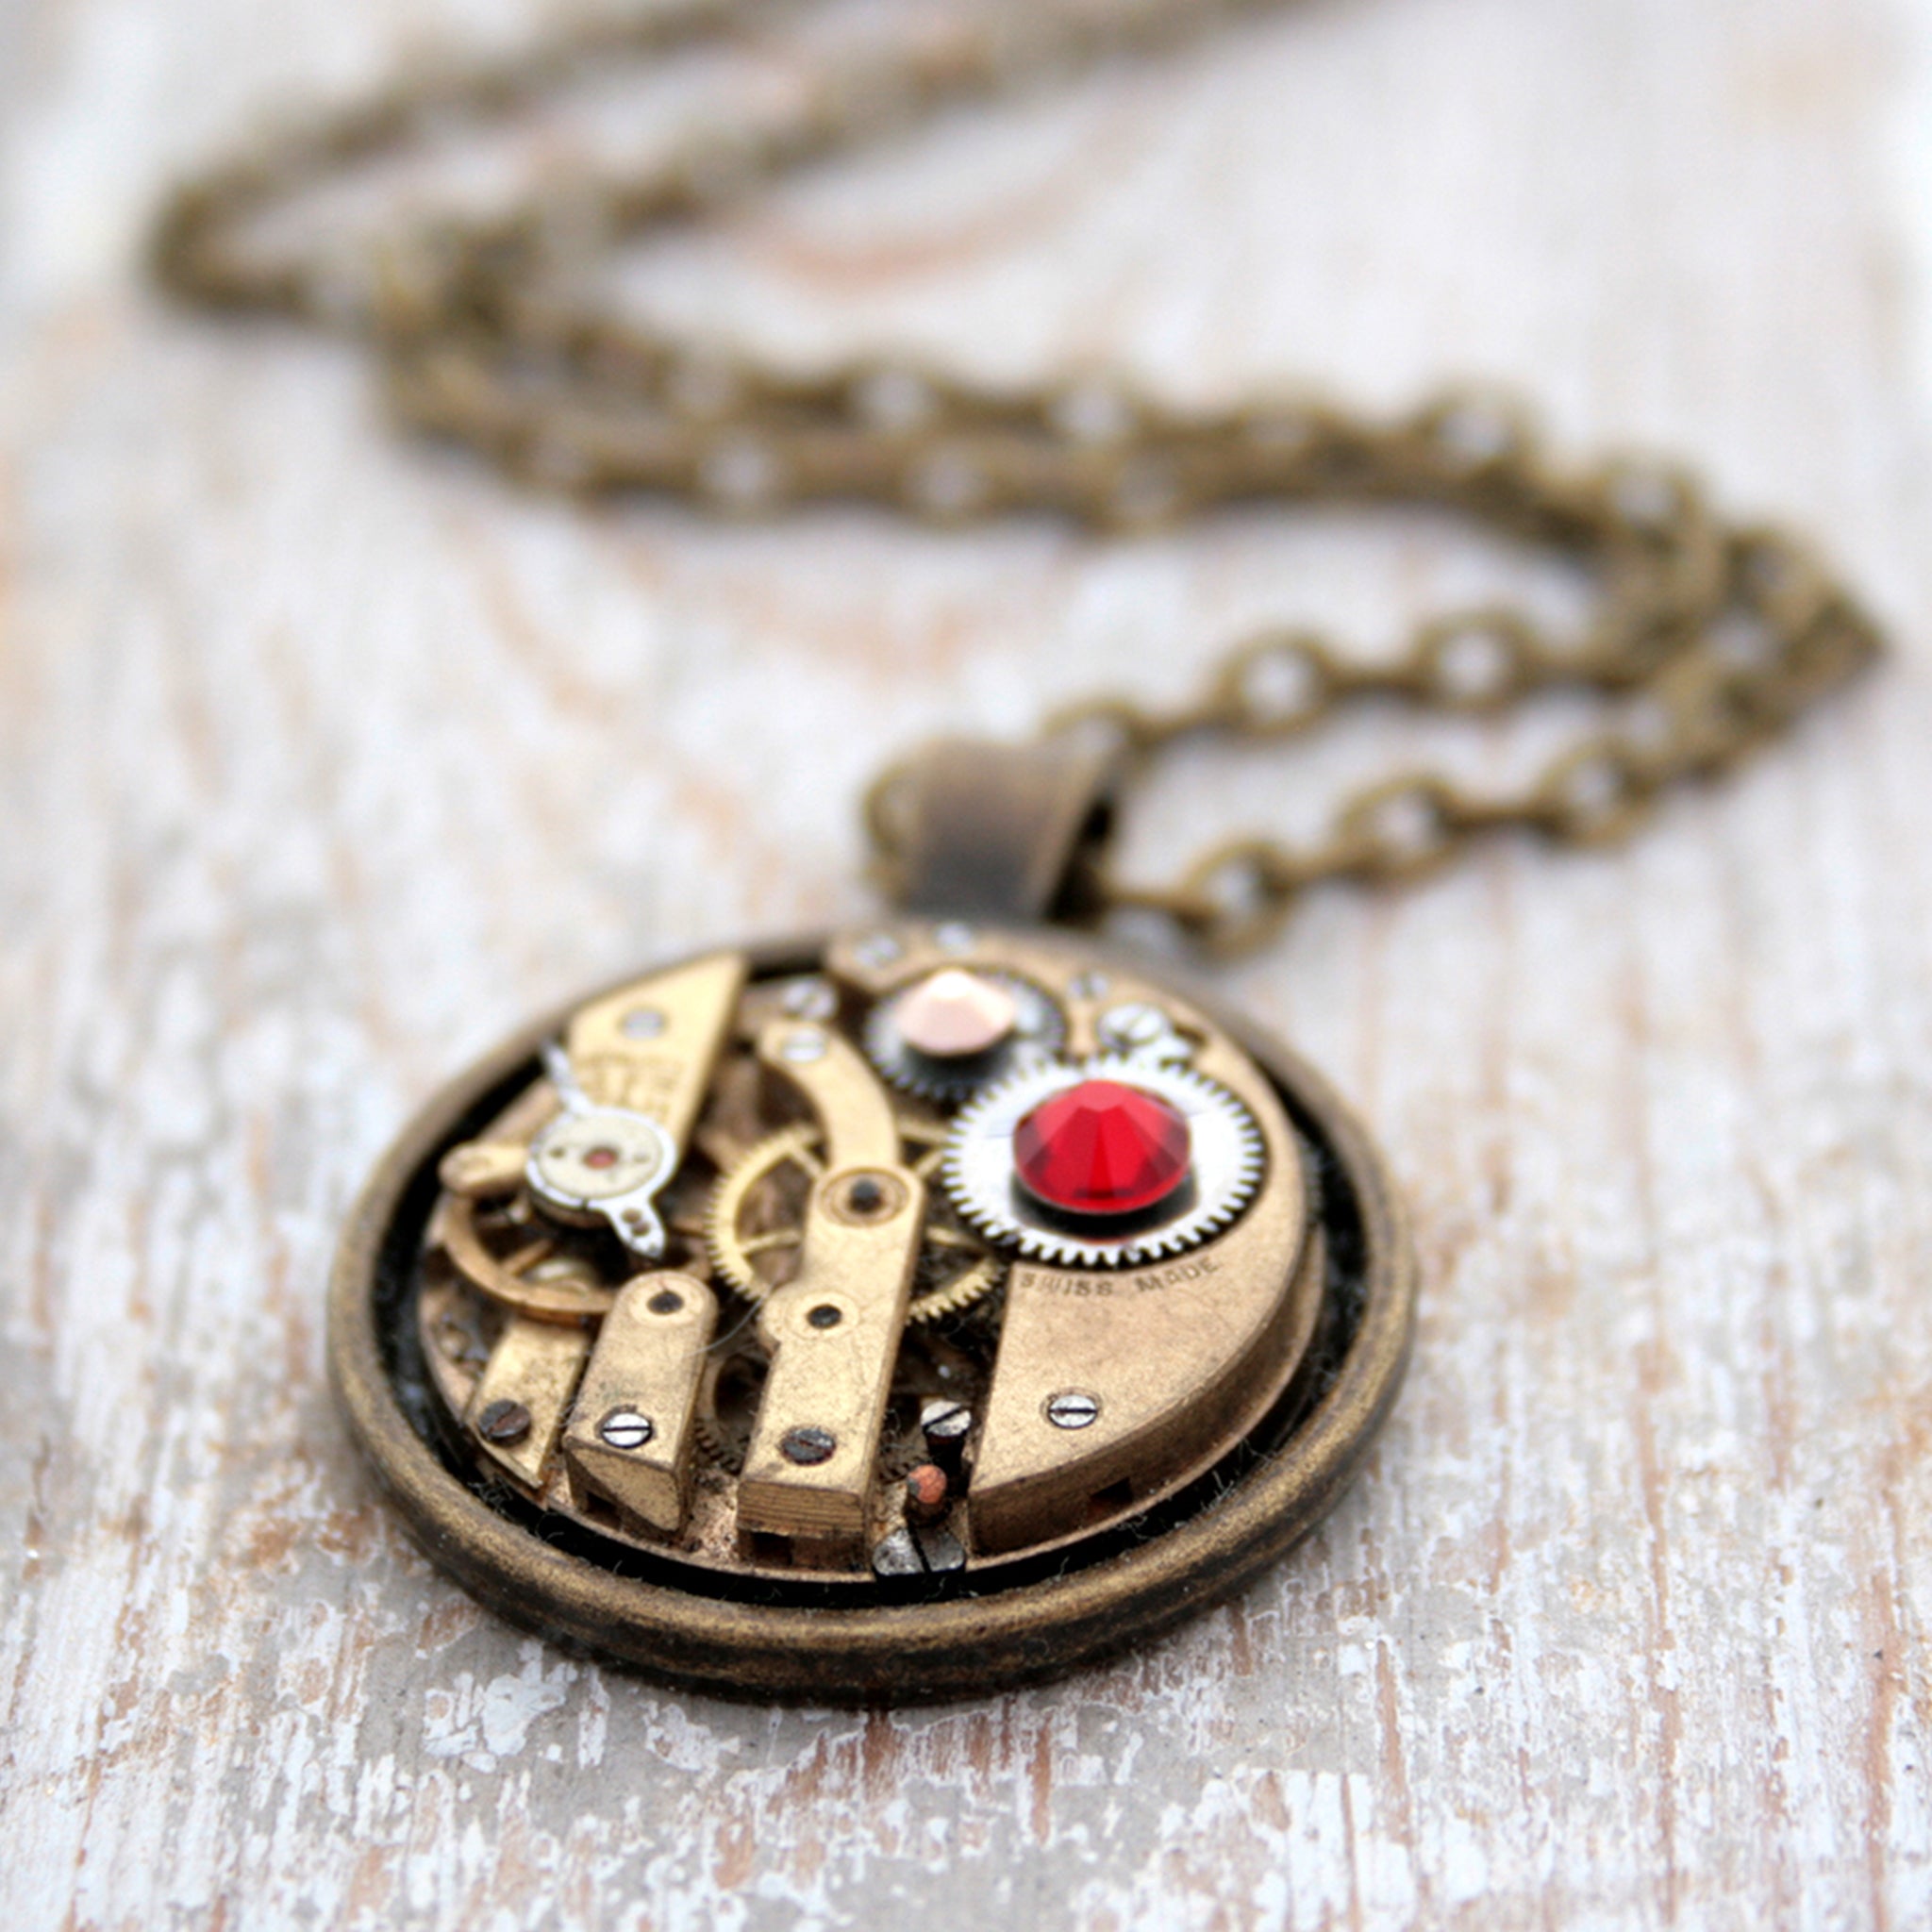 Steampunk Necklace with Scarlet Crystal